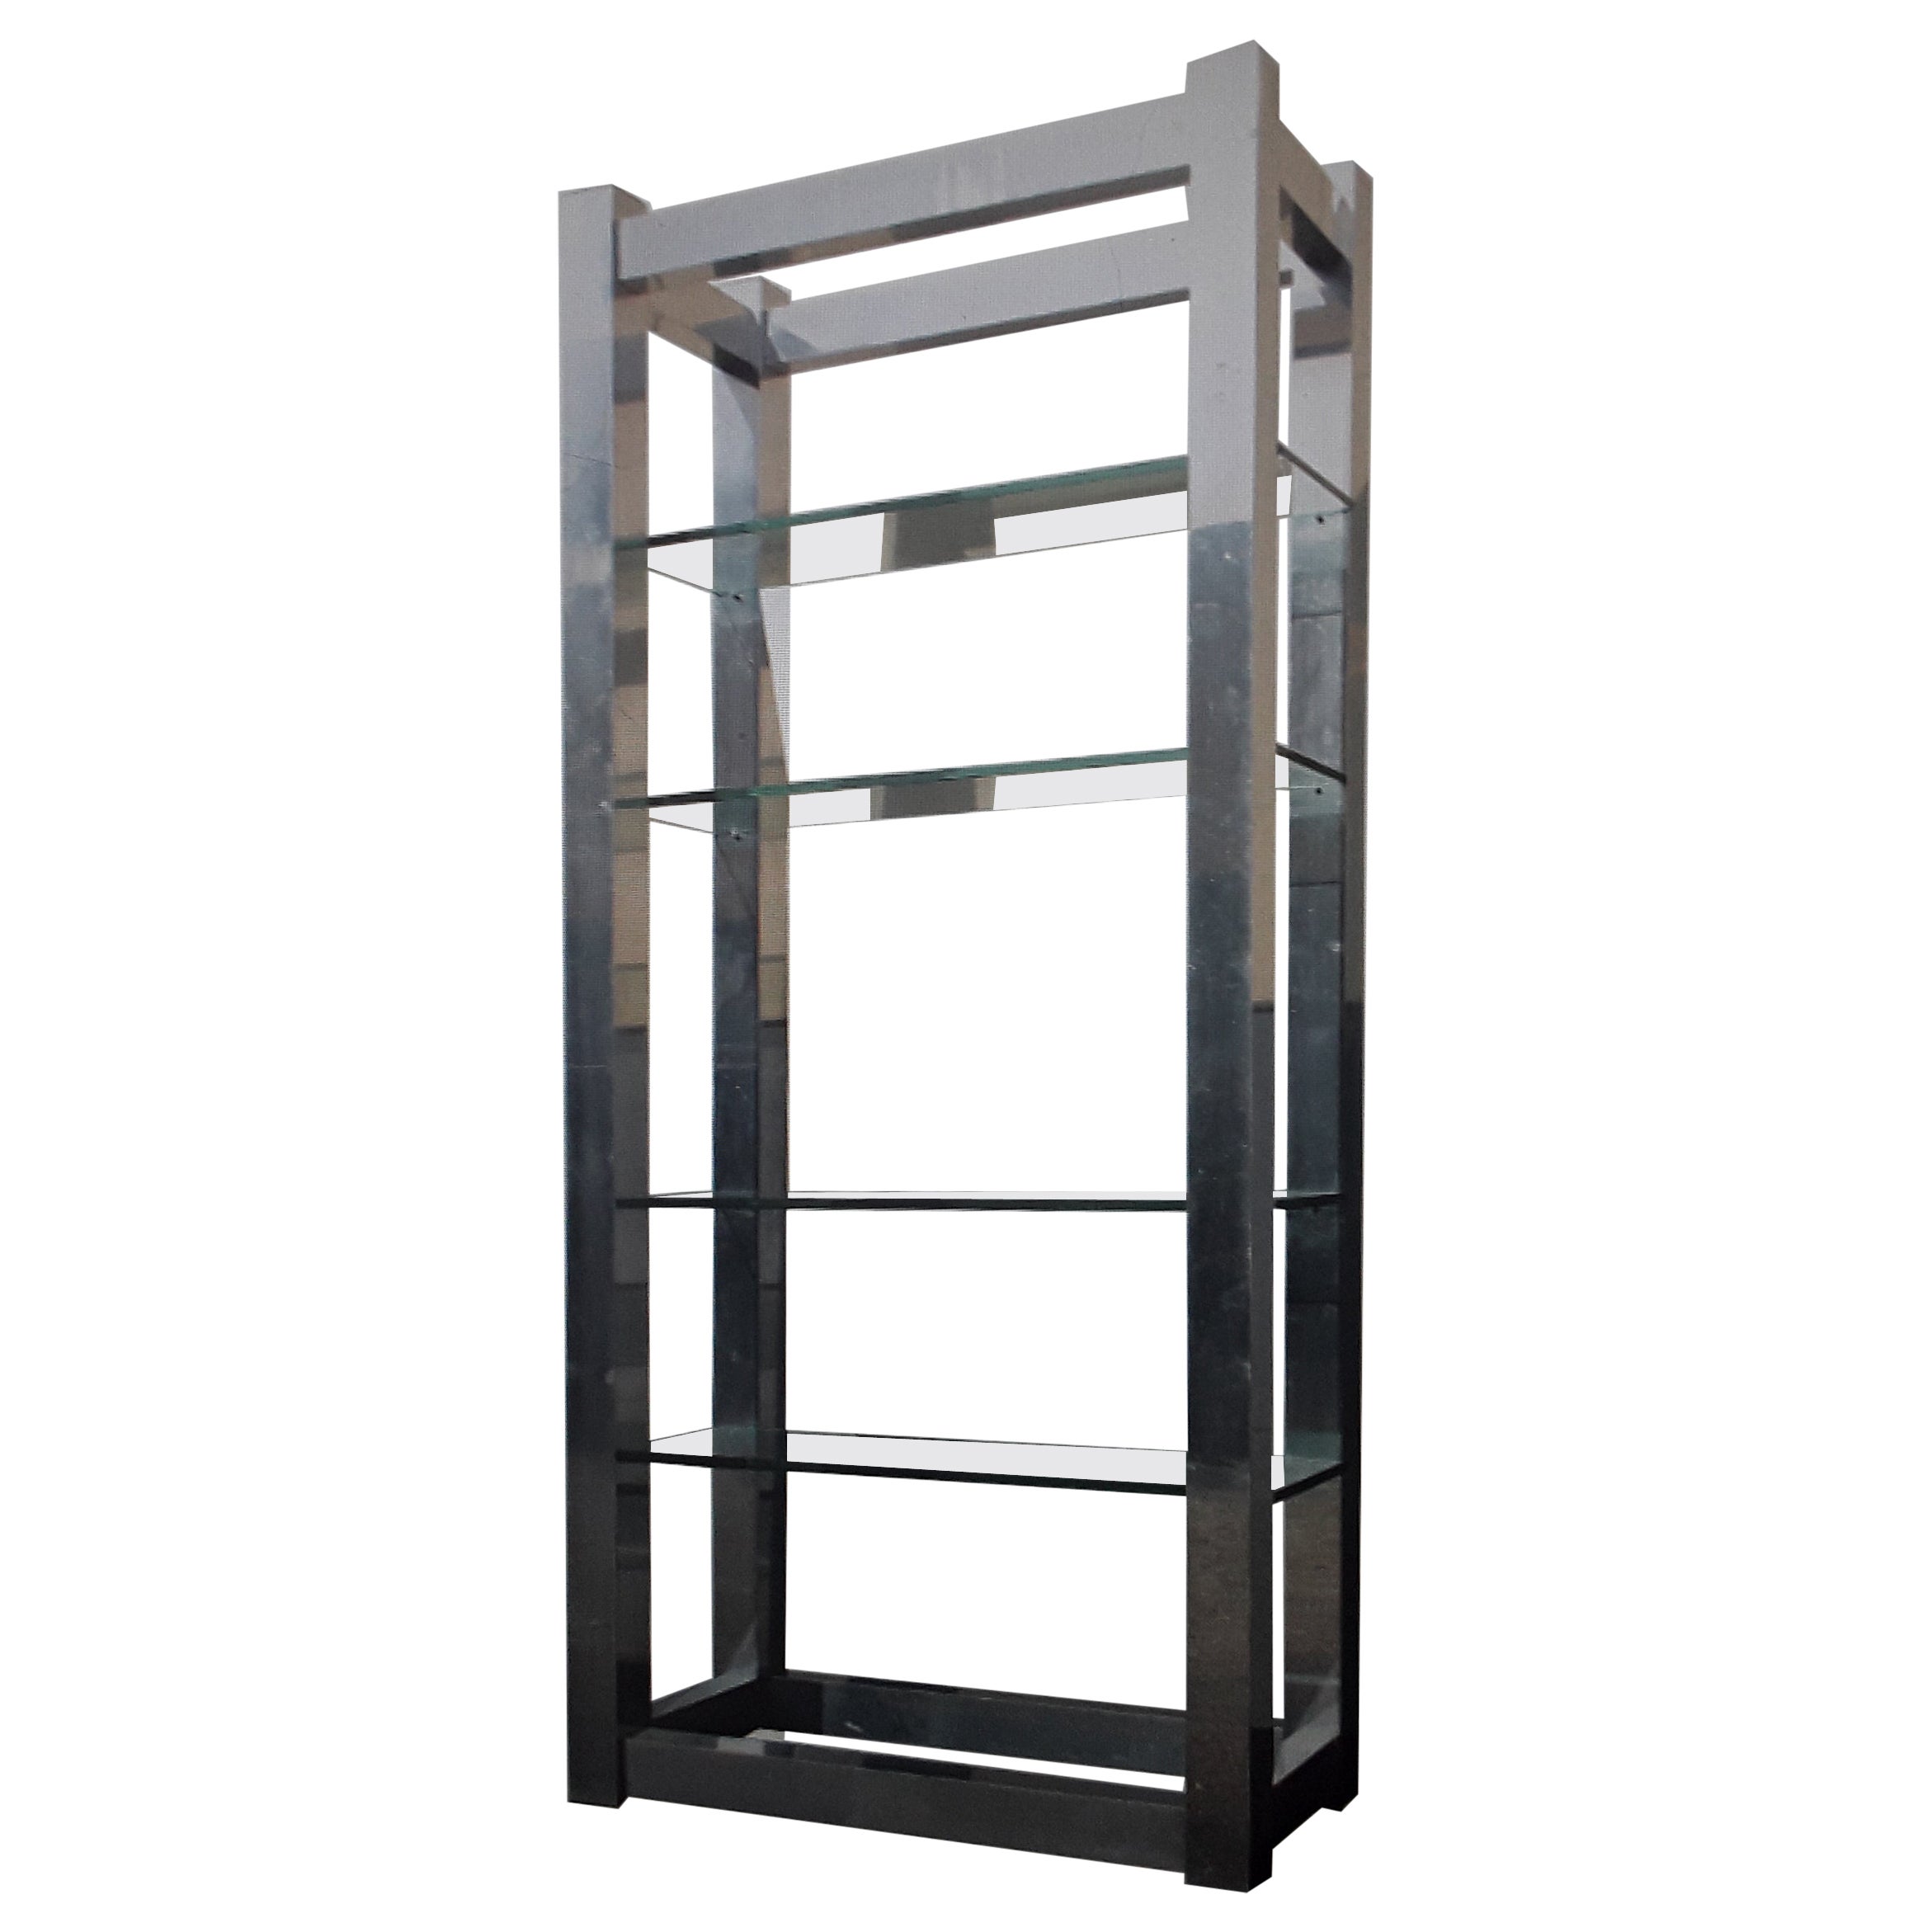 1970's Modern Silver Chrome Finish Metal 6 Shelf Etagere Wall Cabinet For Sale